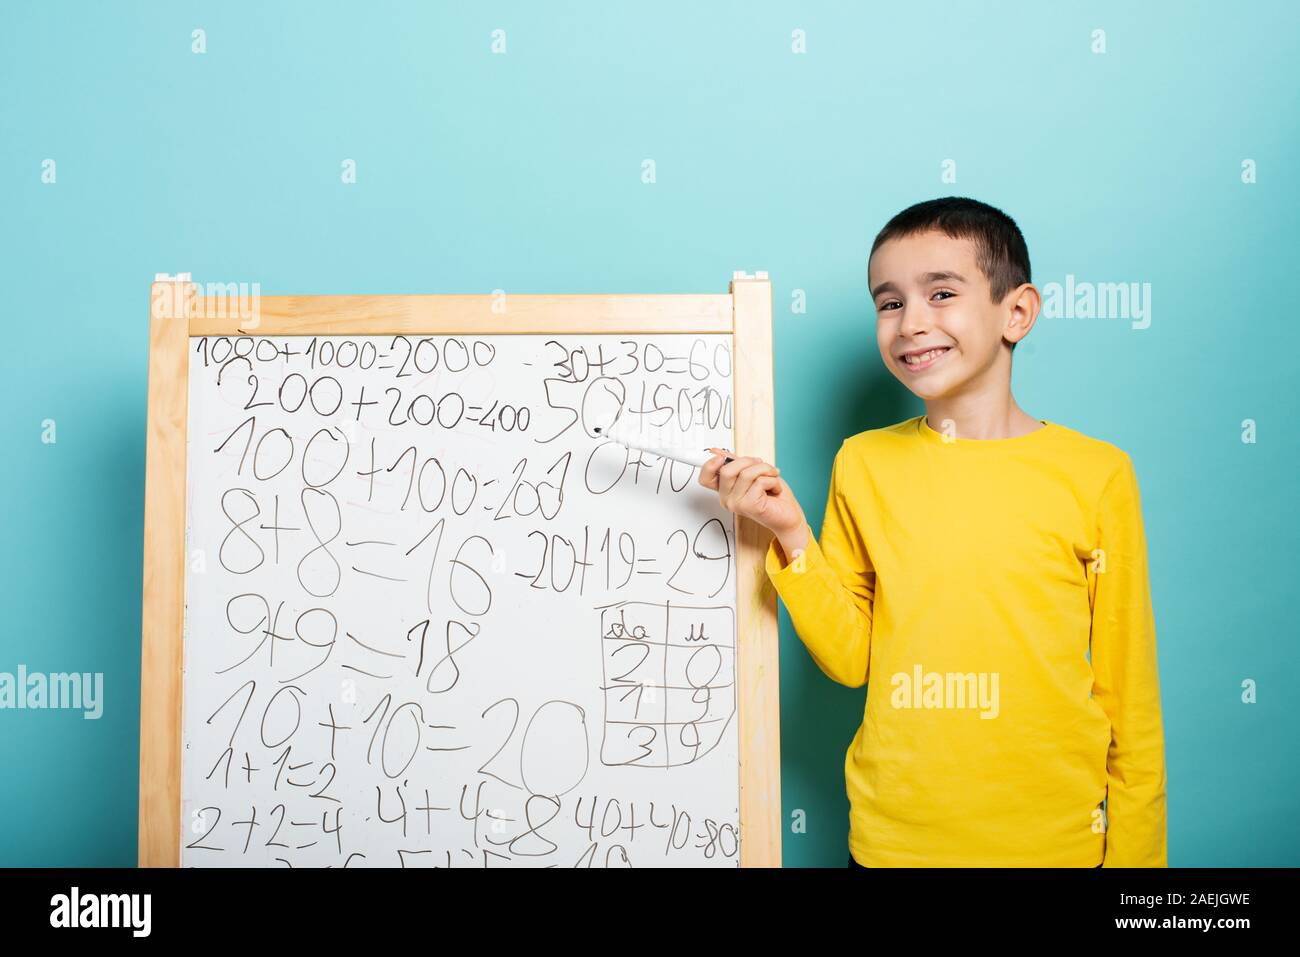 Child solves mathematical problem with abacus. Cyan background Stock Photo